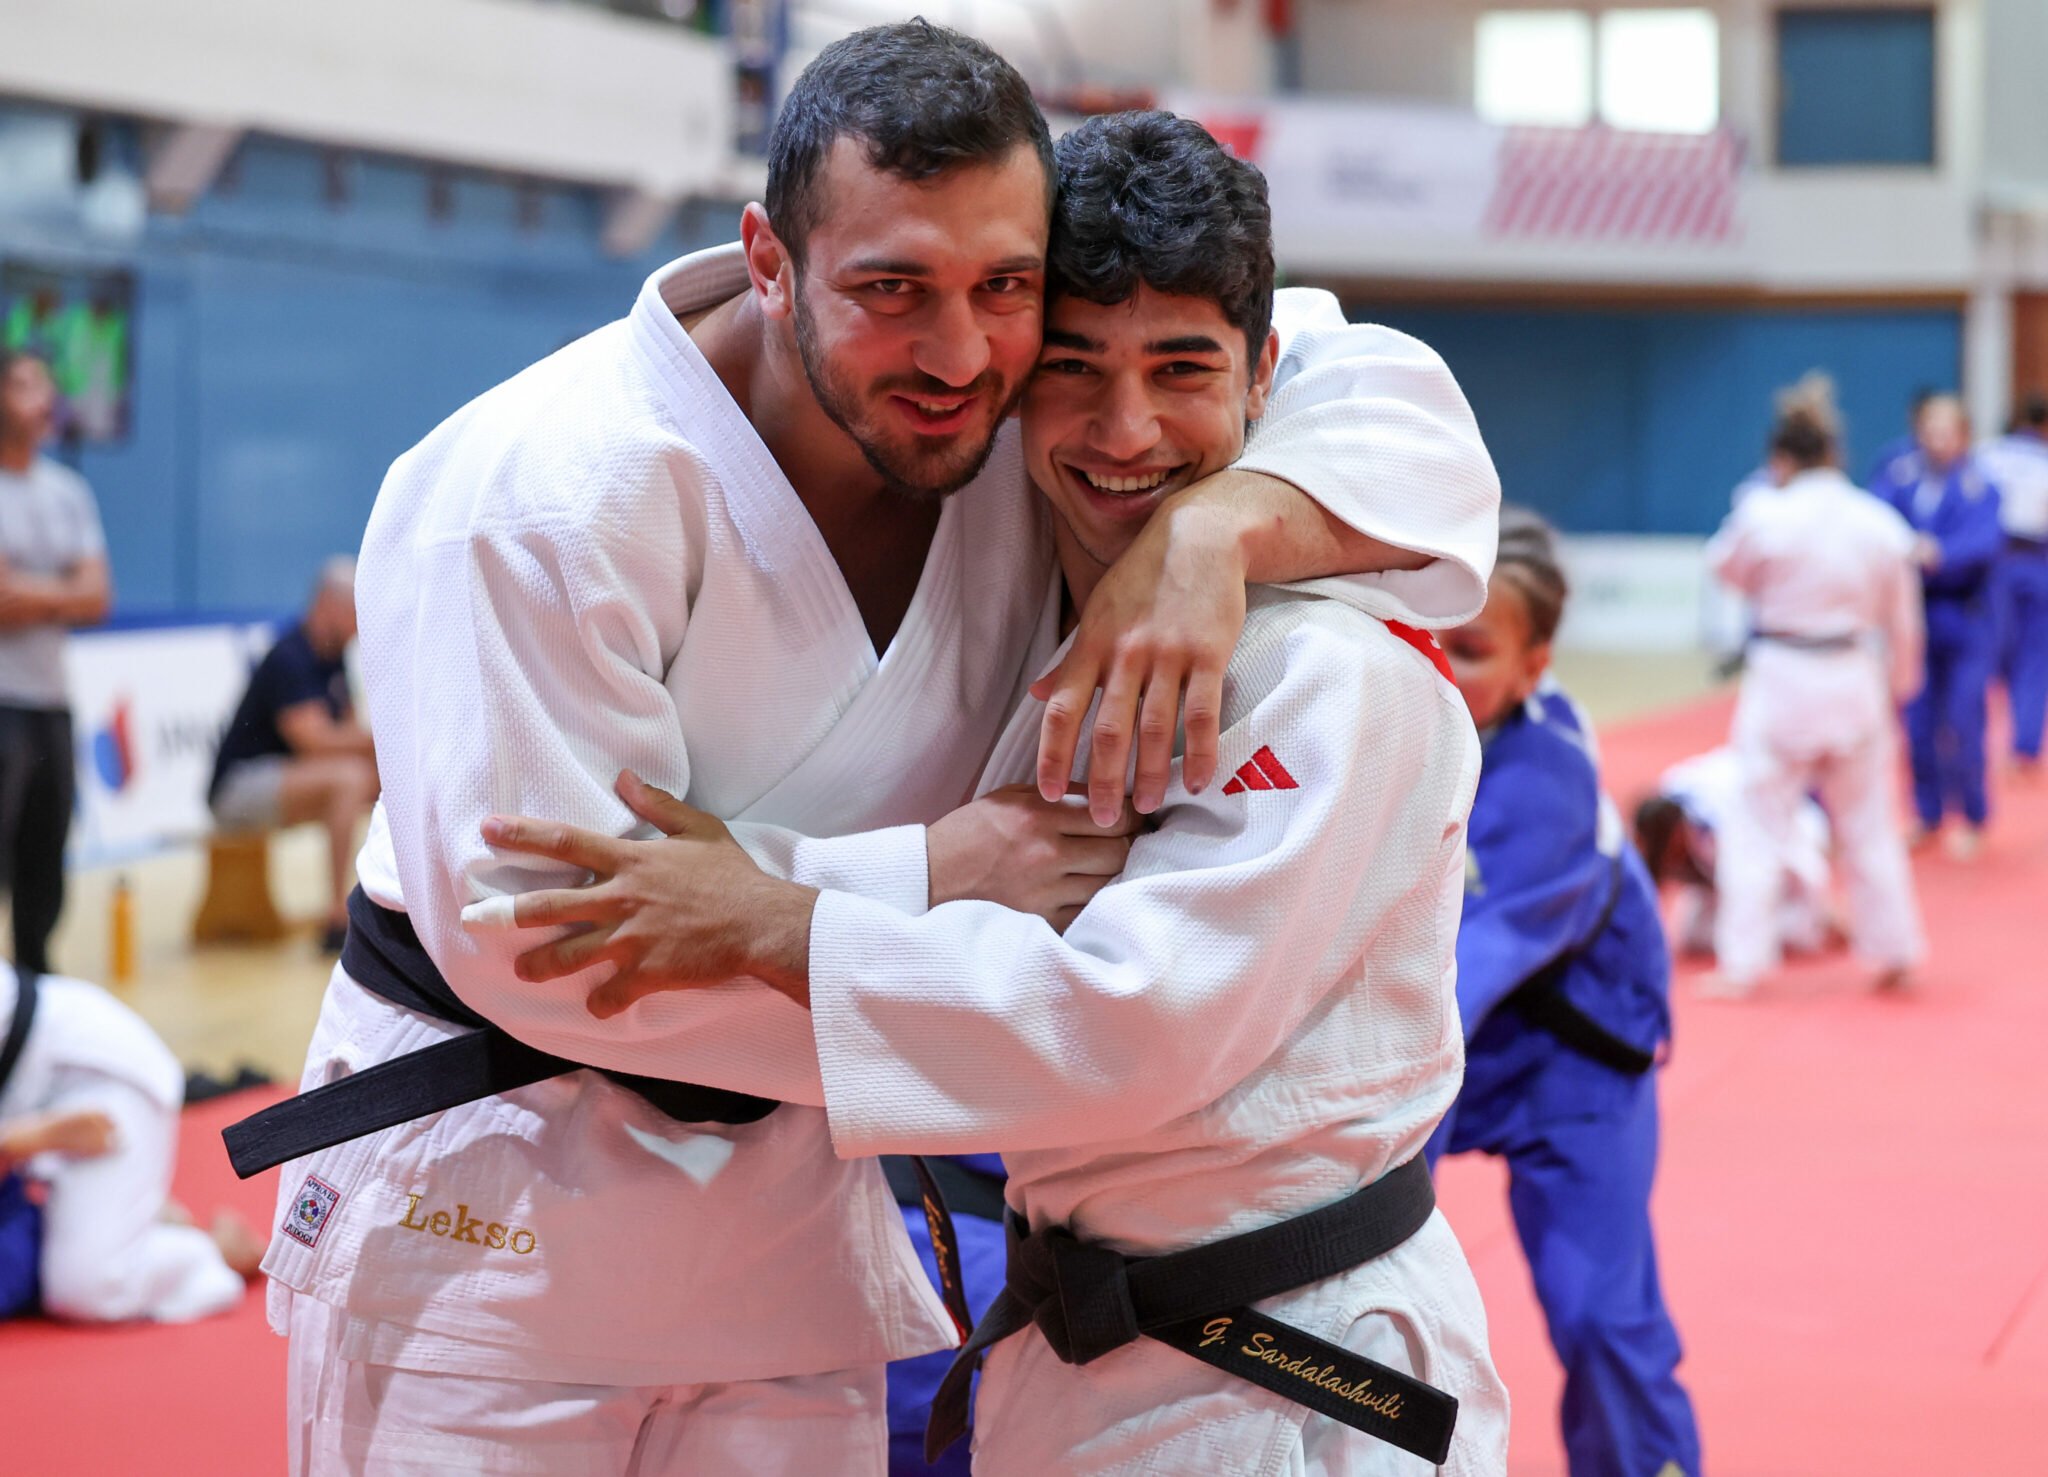 FRIENDSHIP IS A CORE ELEMENT OF JUDO